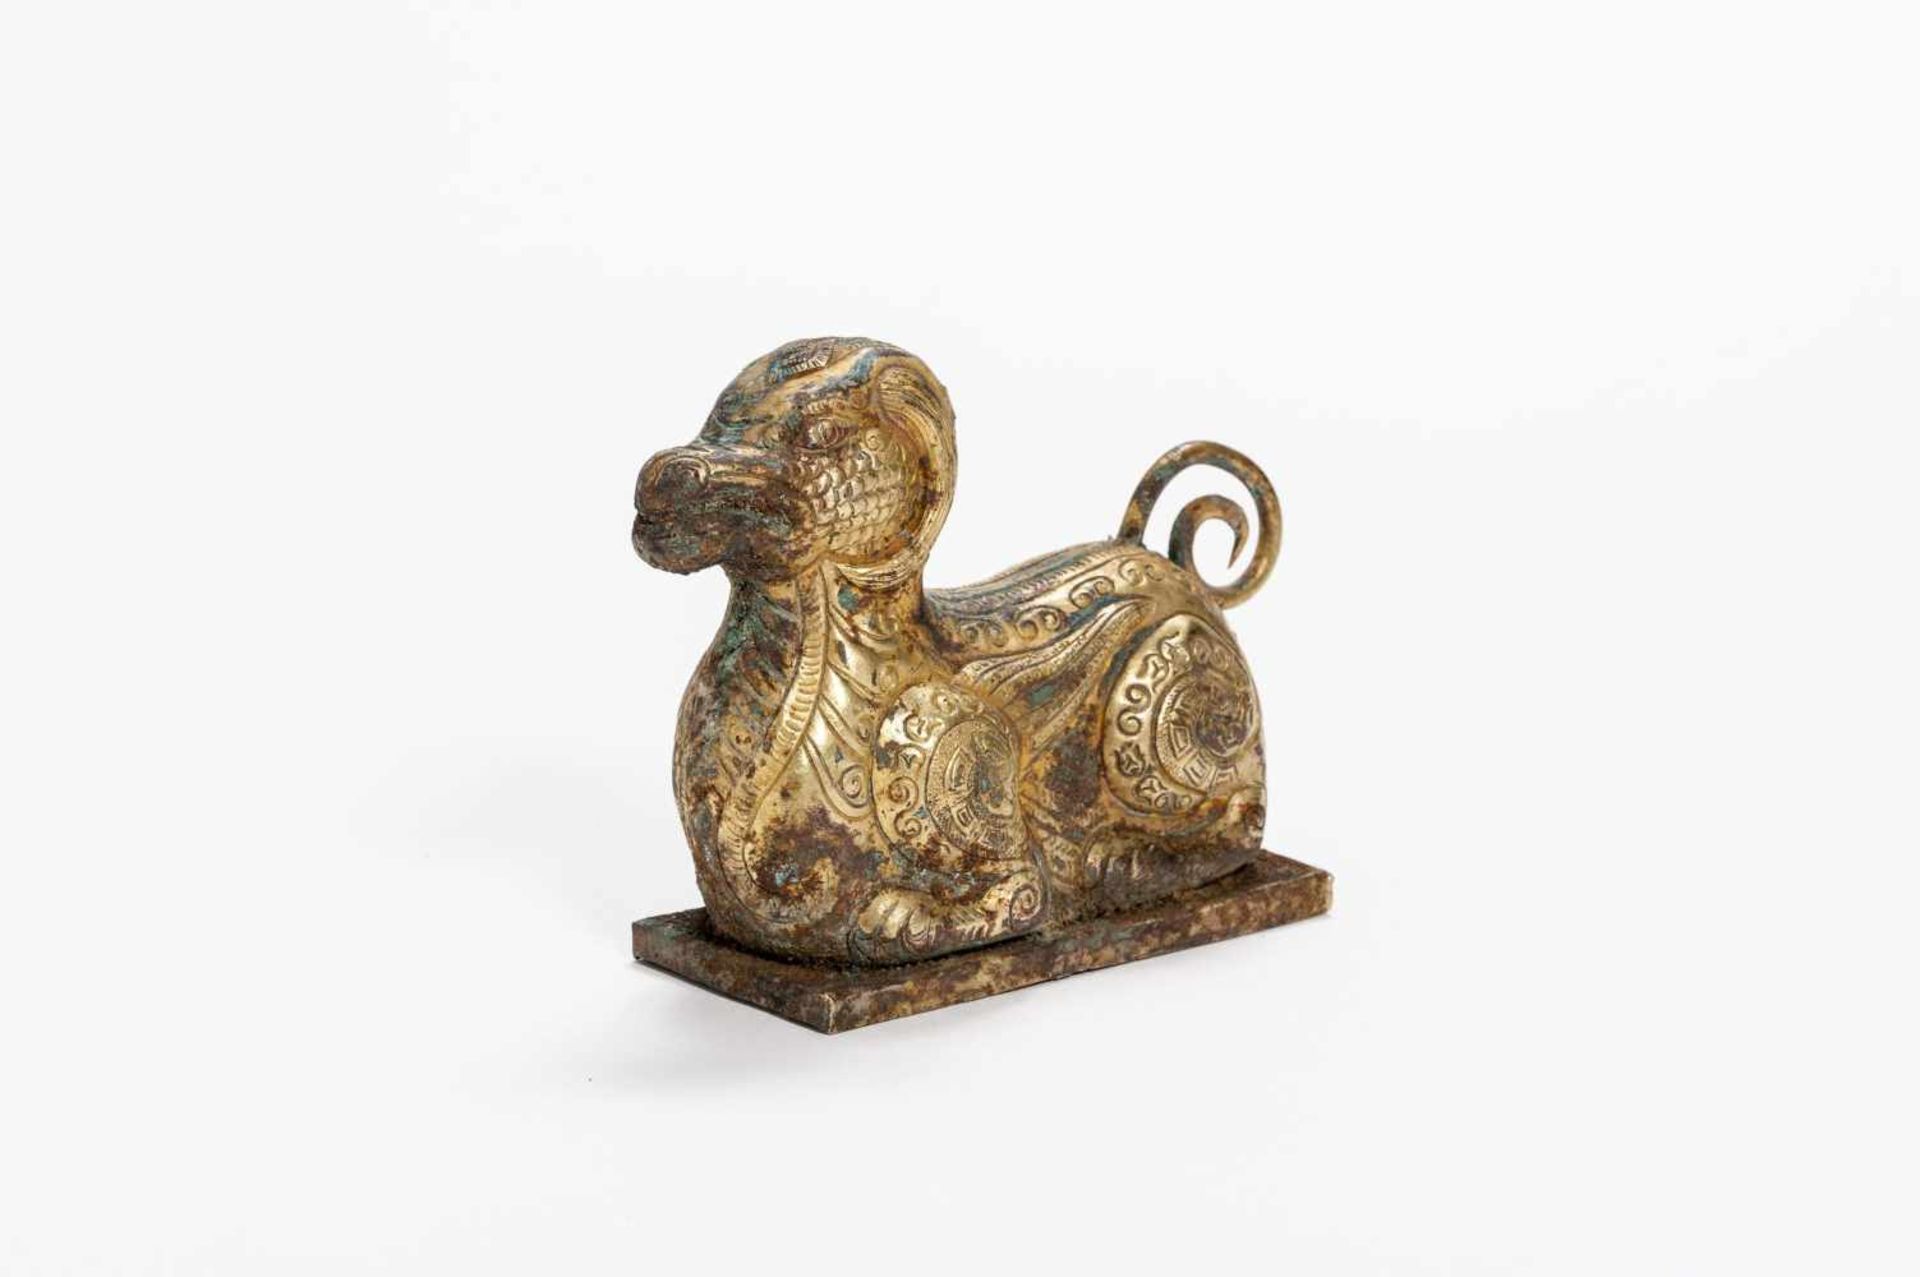 MYTHICAL ANIMAL Copper repoussé with fire gilding. China, presumably Qing-dynasty In archaic - Image 6 of 6